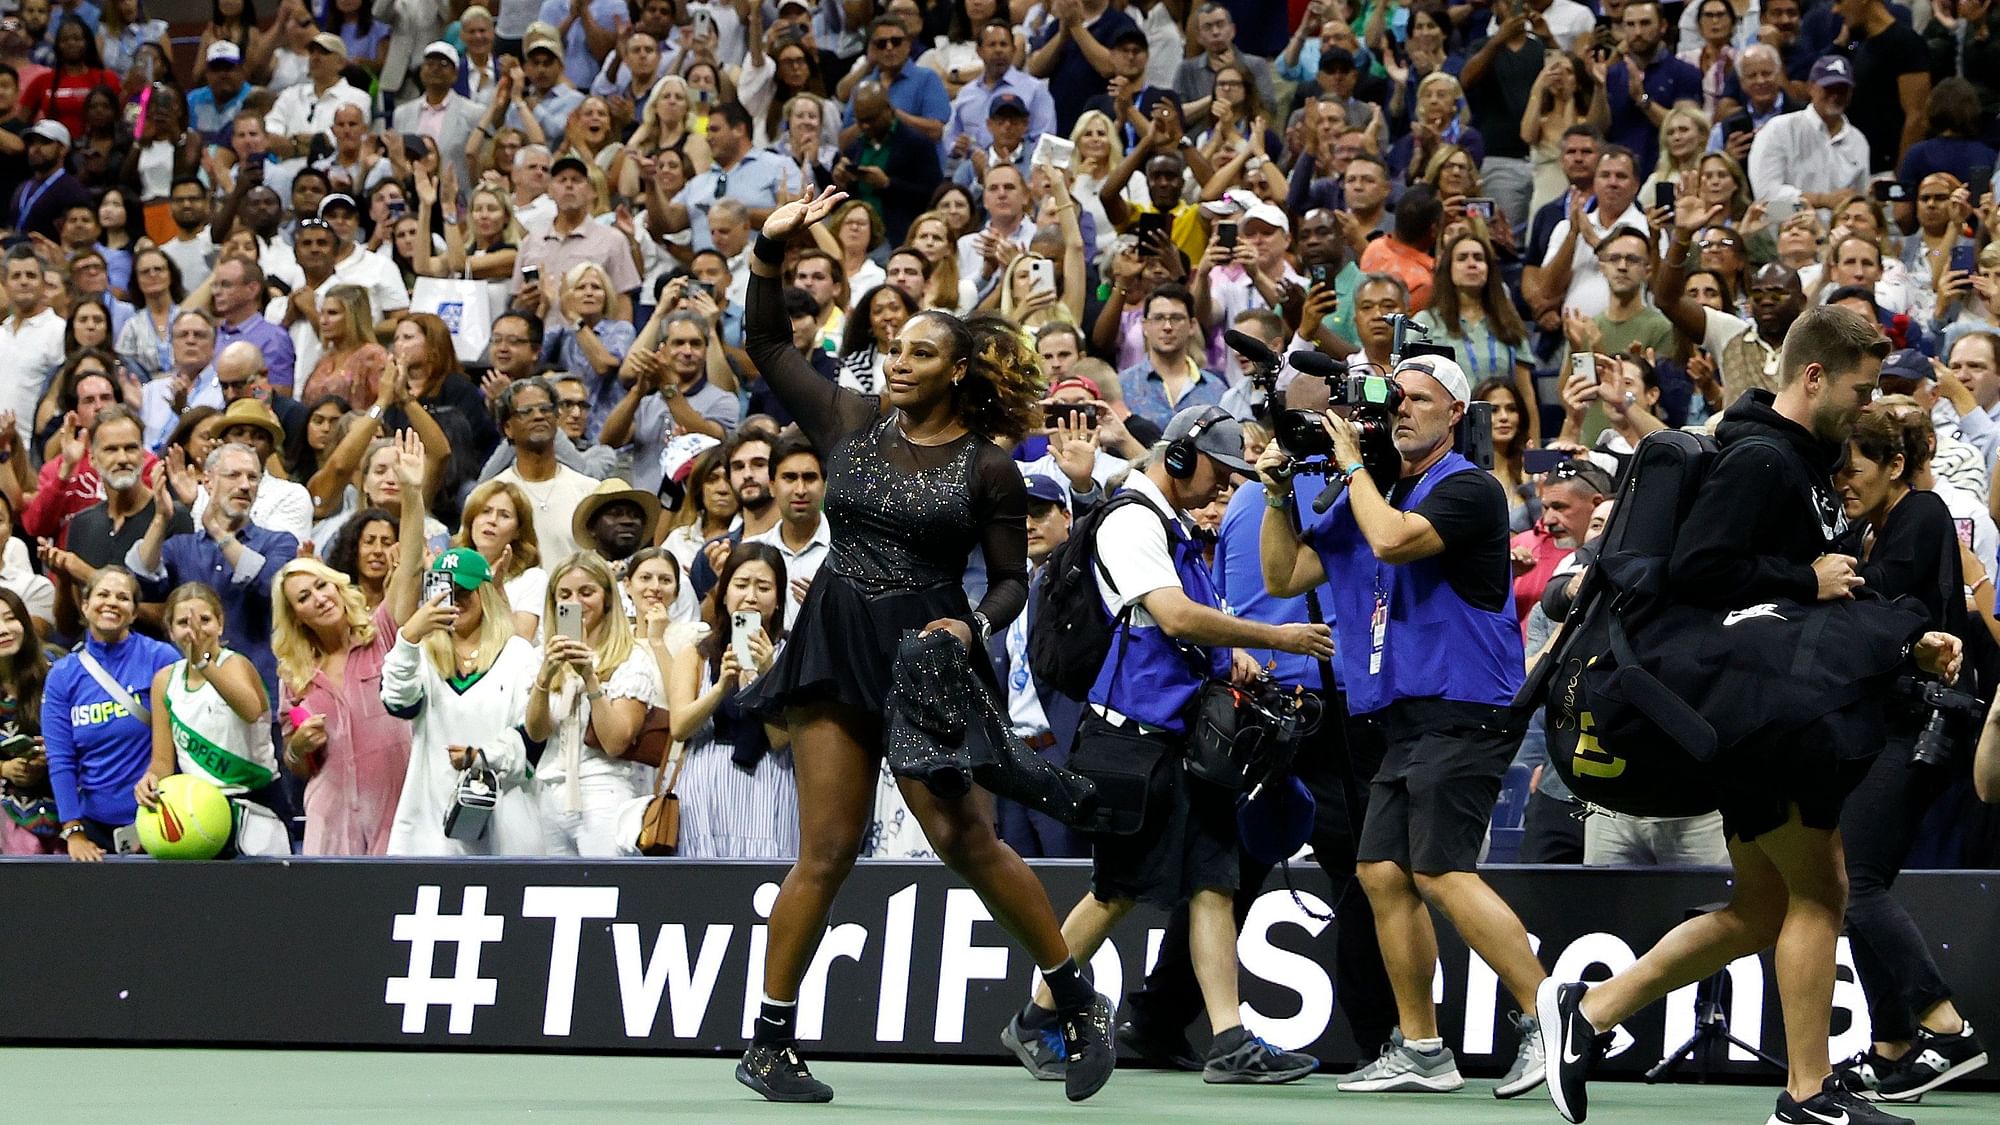 <div class="paragraphs"><p>Serena Williams bids goodbye to the crowd at the Arthur Ashe Stadium following her third-round loss at the US Open 2022.&nbsp;</p></div>